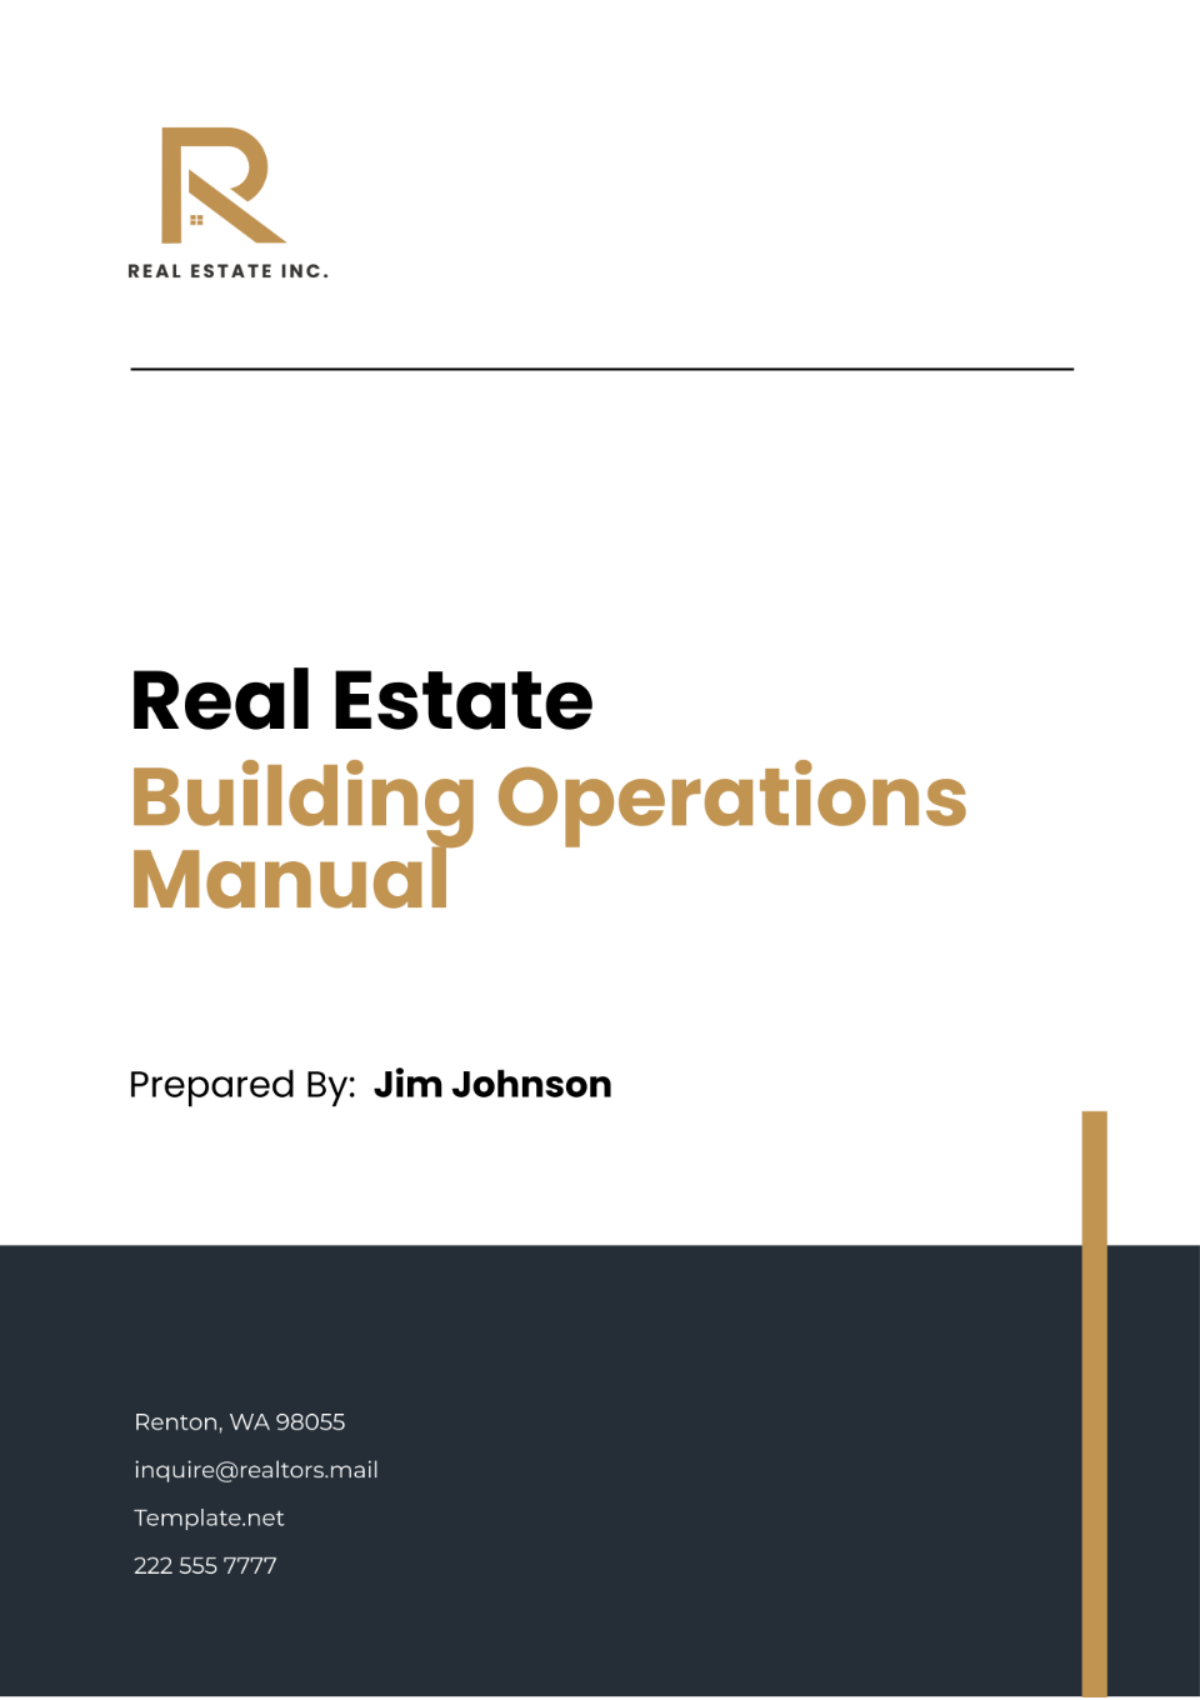 Real Estate Building Operations Manual Template